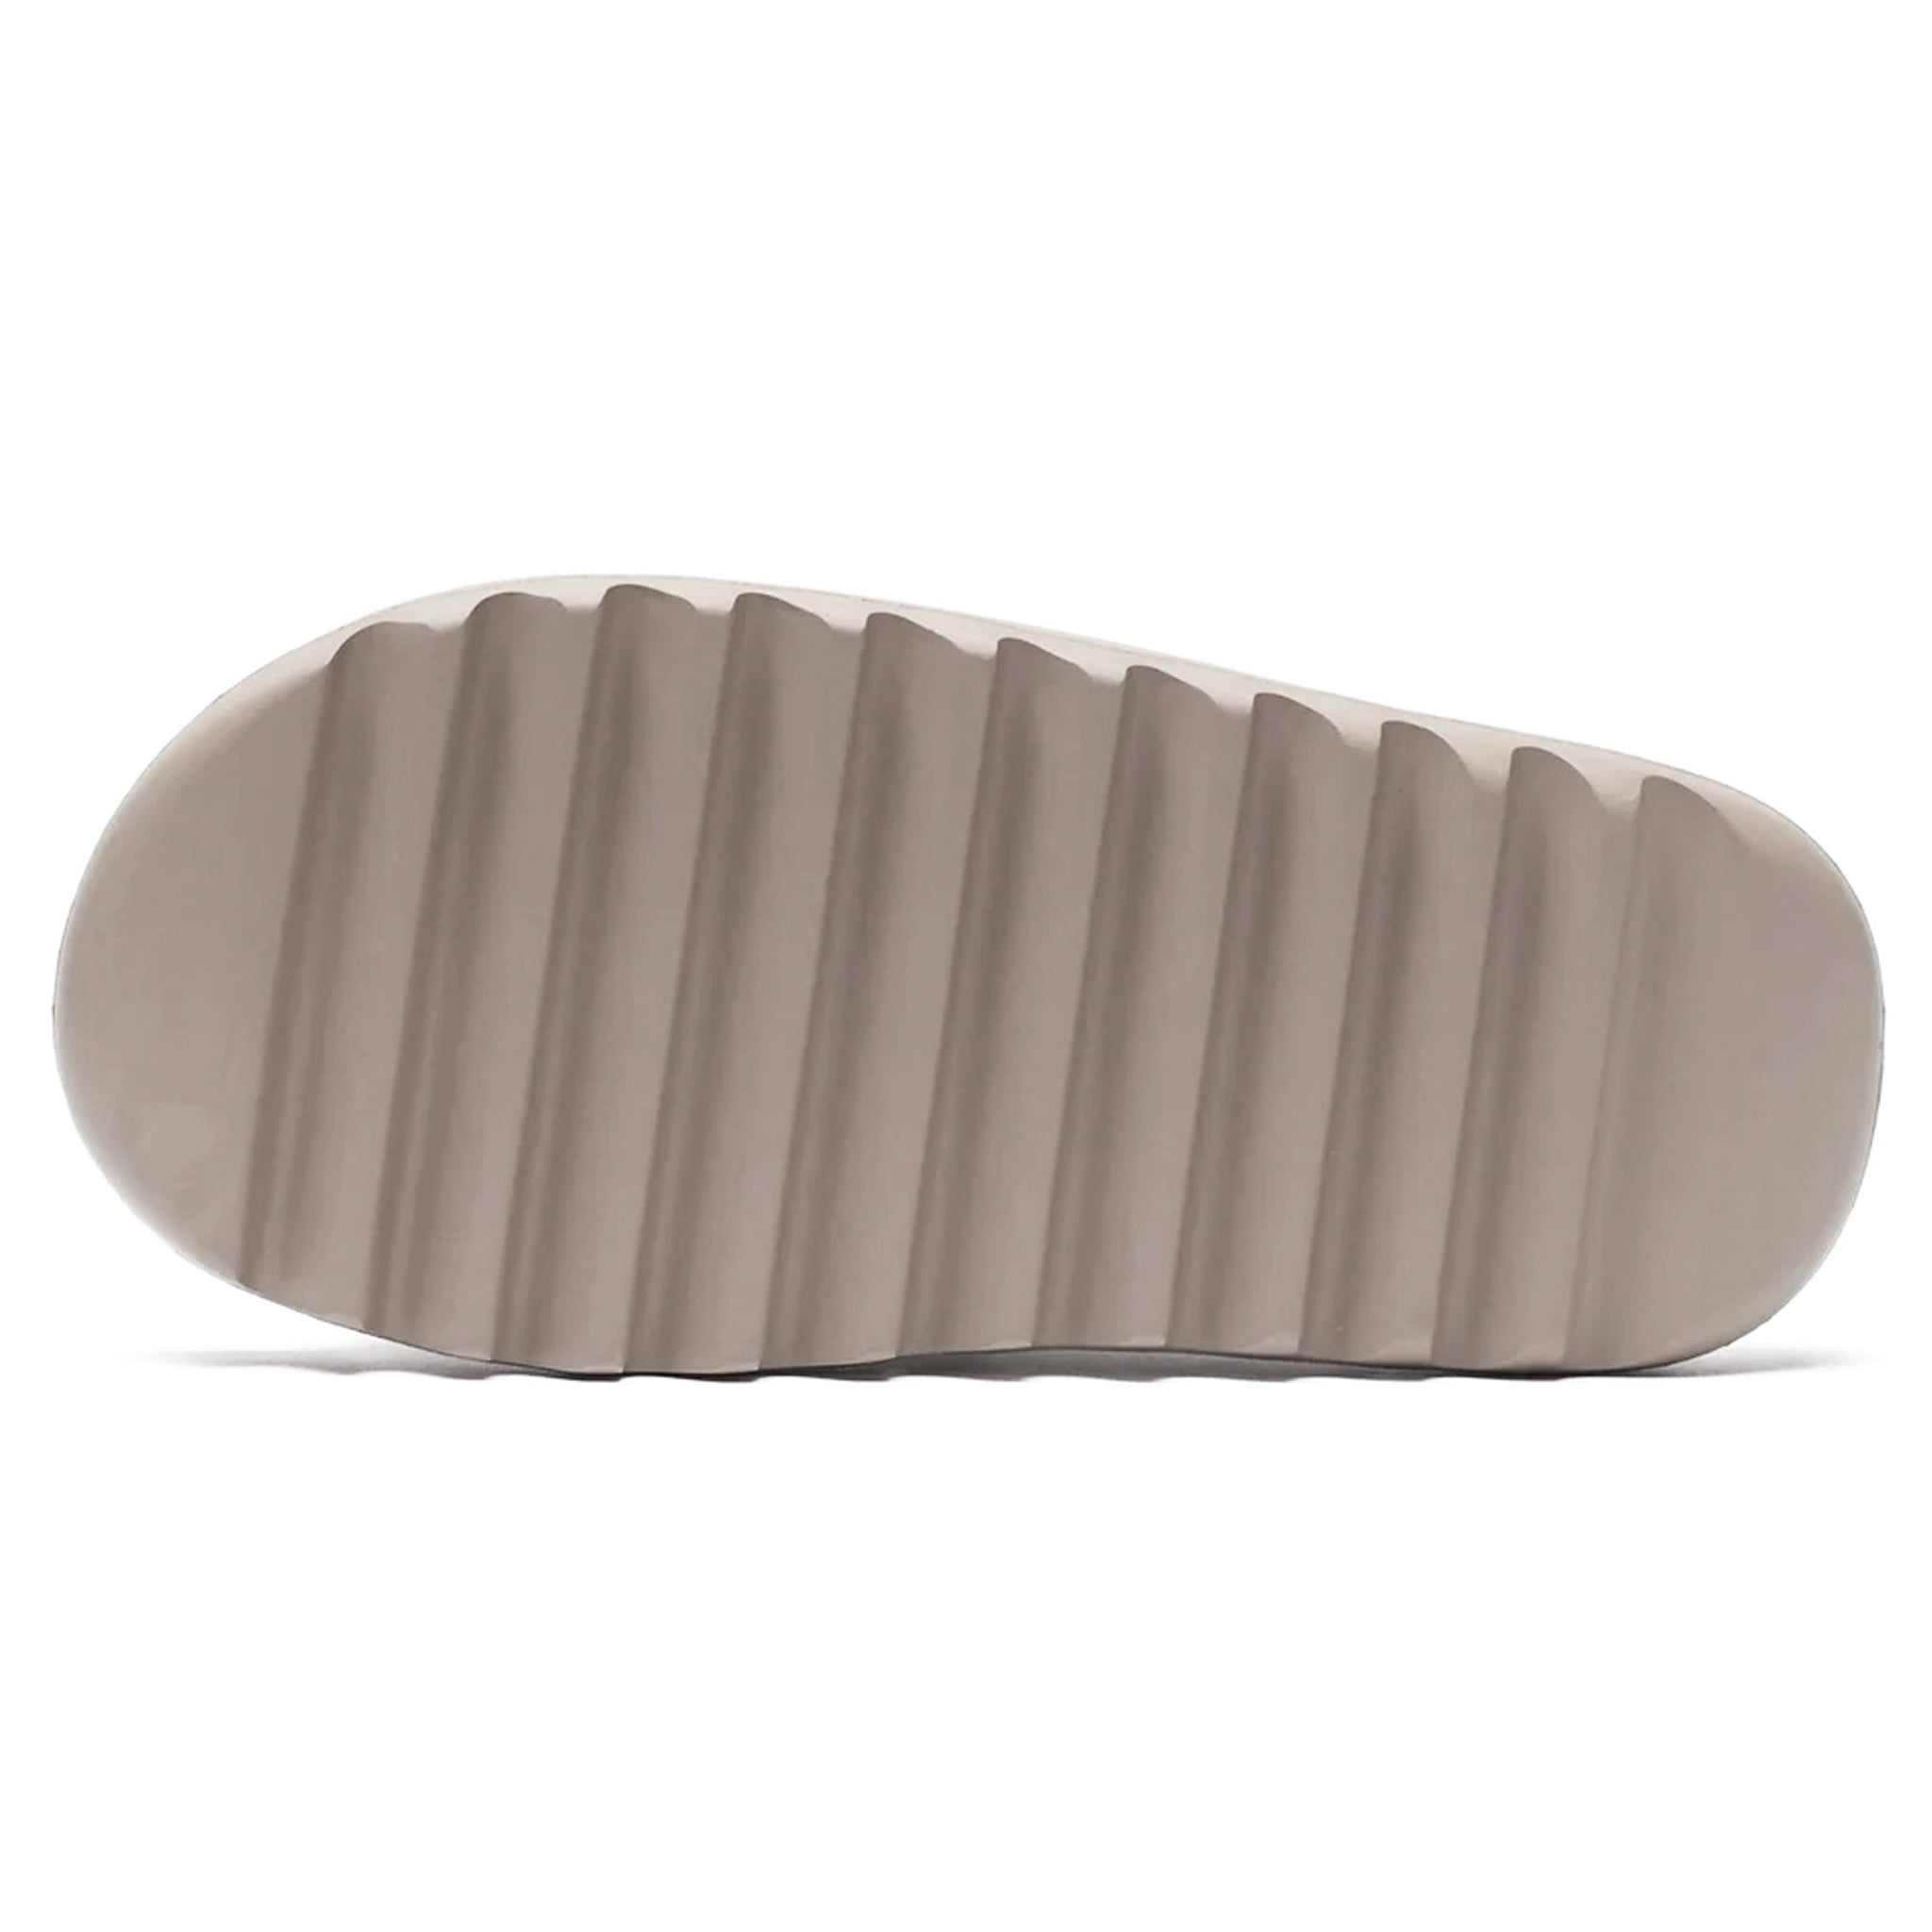 Sole view of Adidas Yeezy Slide Pure GZ5554